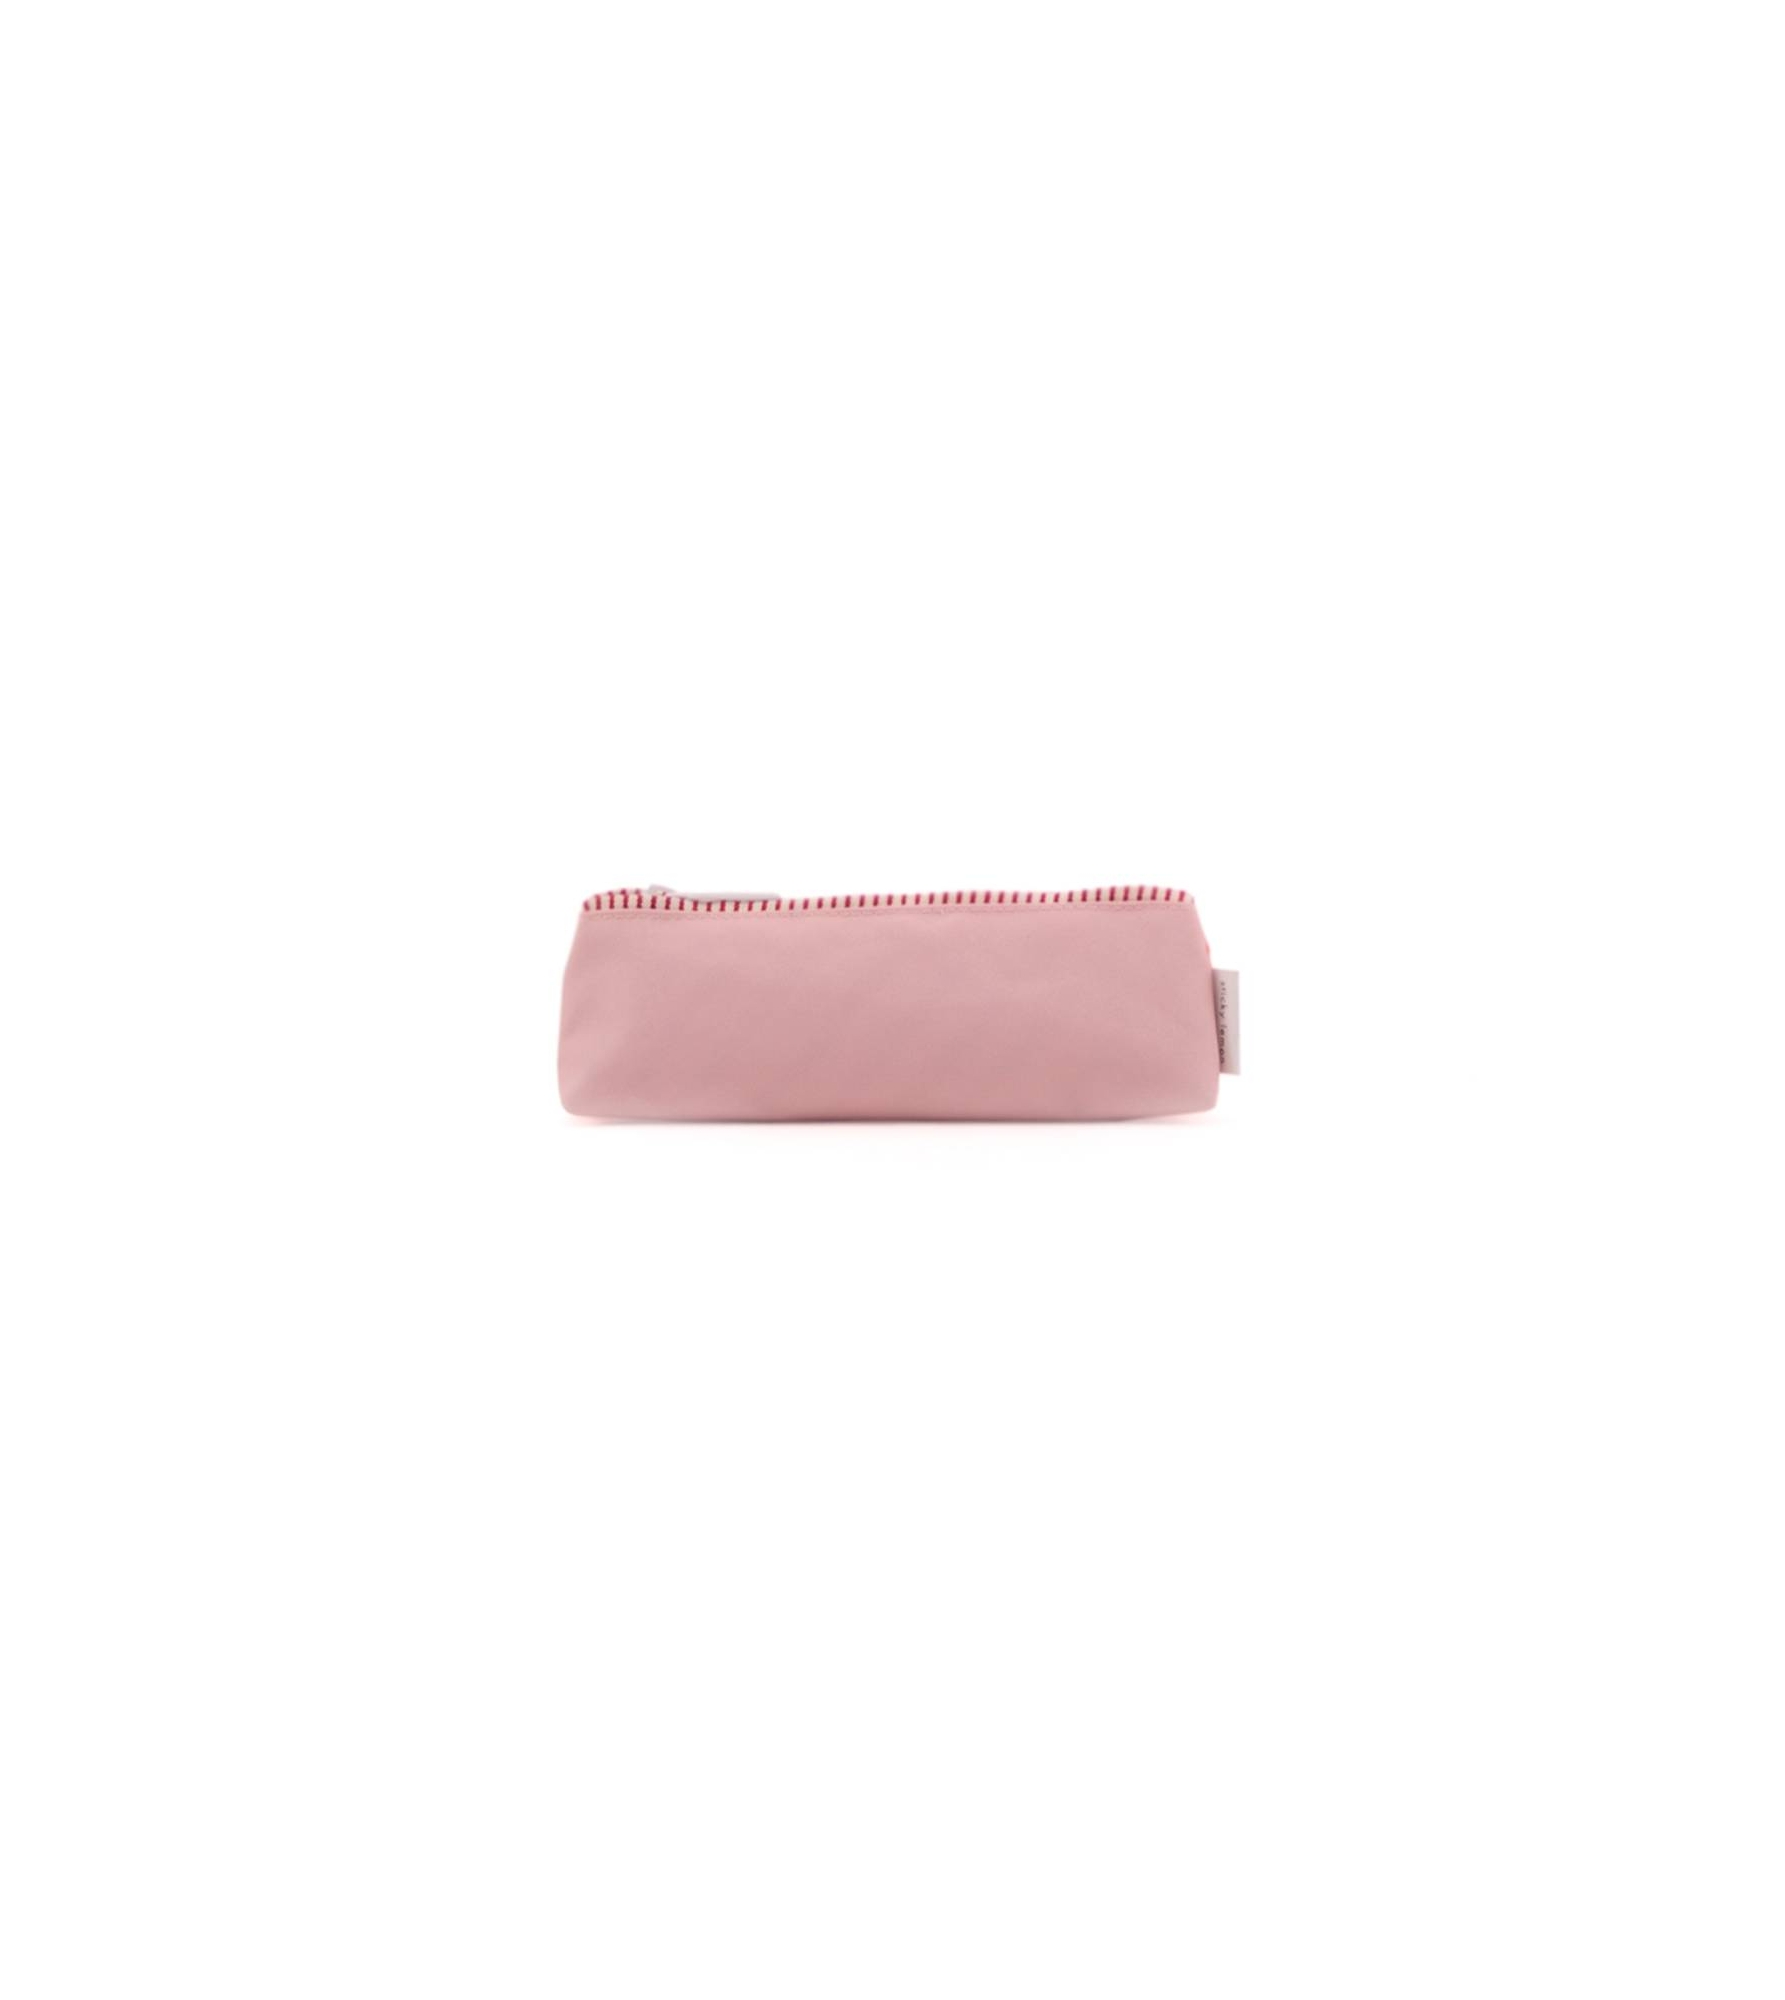 1801408 - Sticky Lemon - product - pencil case small - colour blocking - pastry pink + royal ora_edit.jpg